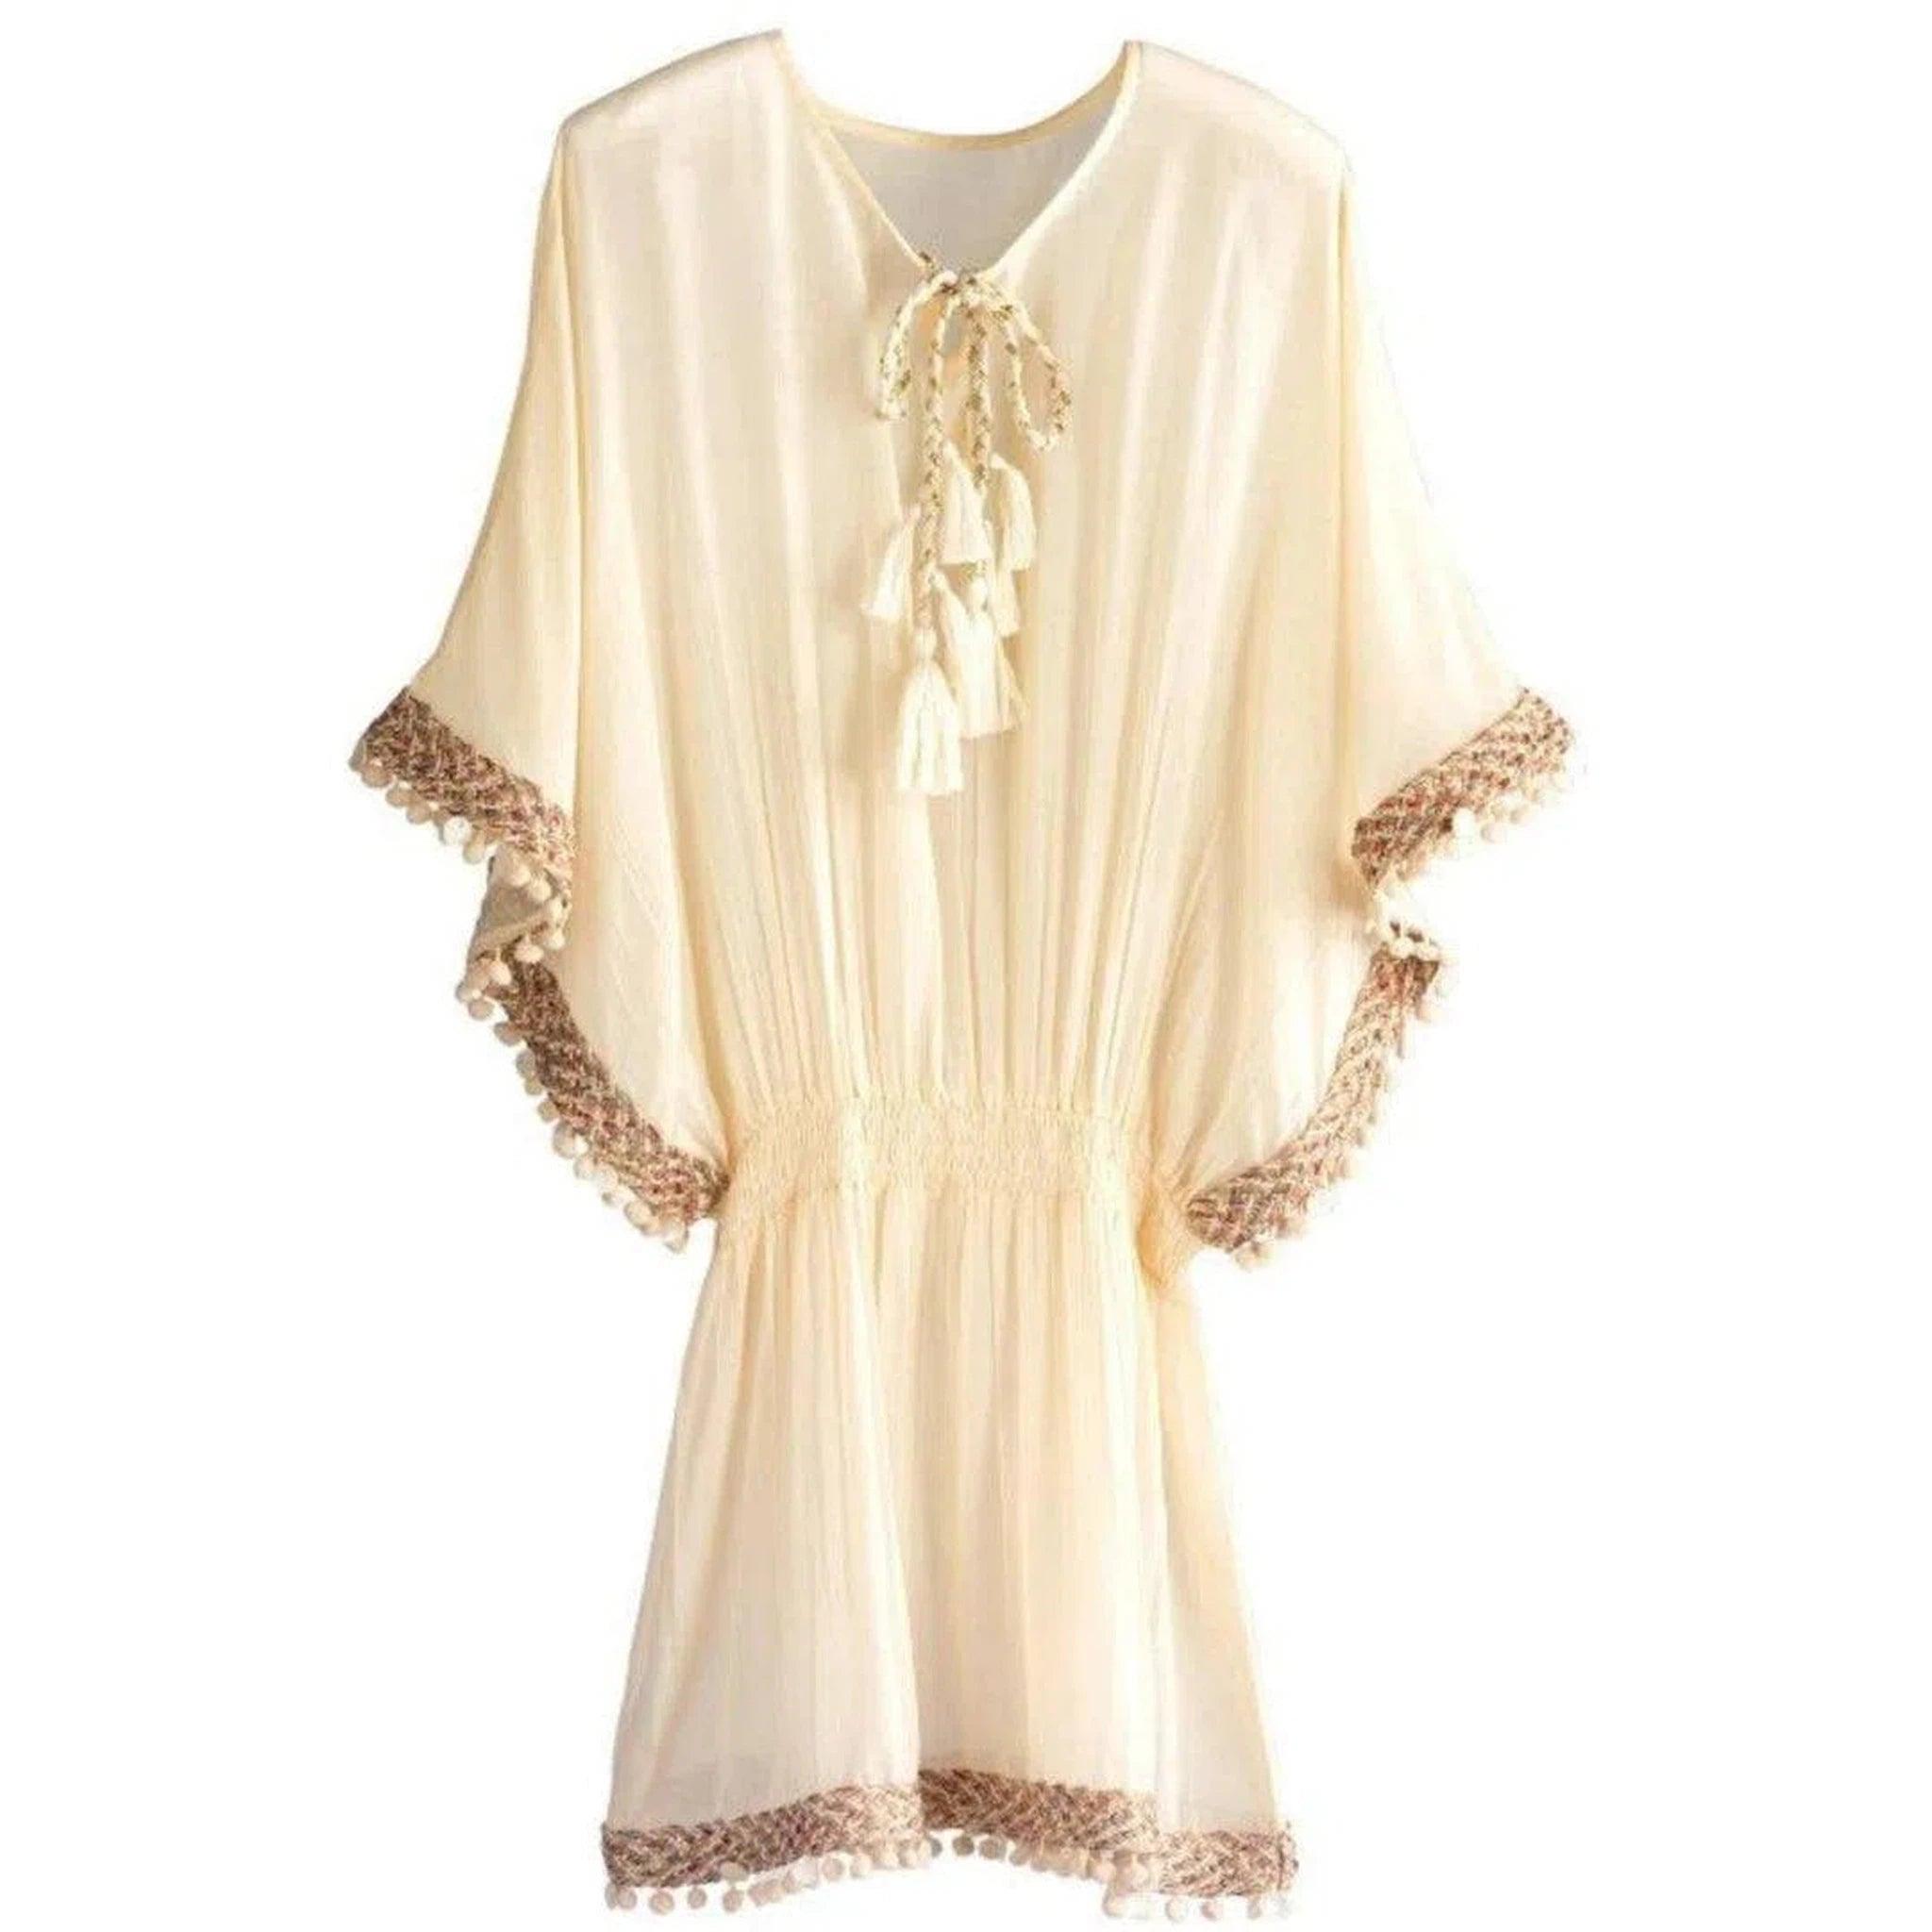 The Dede Beach Cover Up